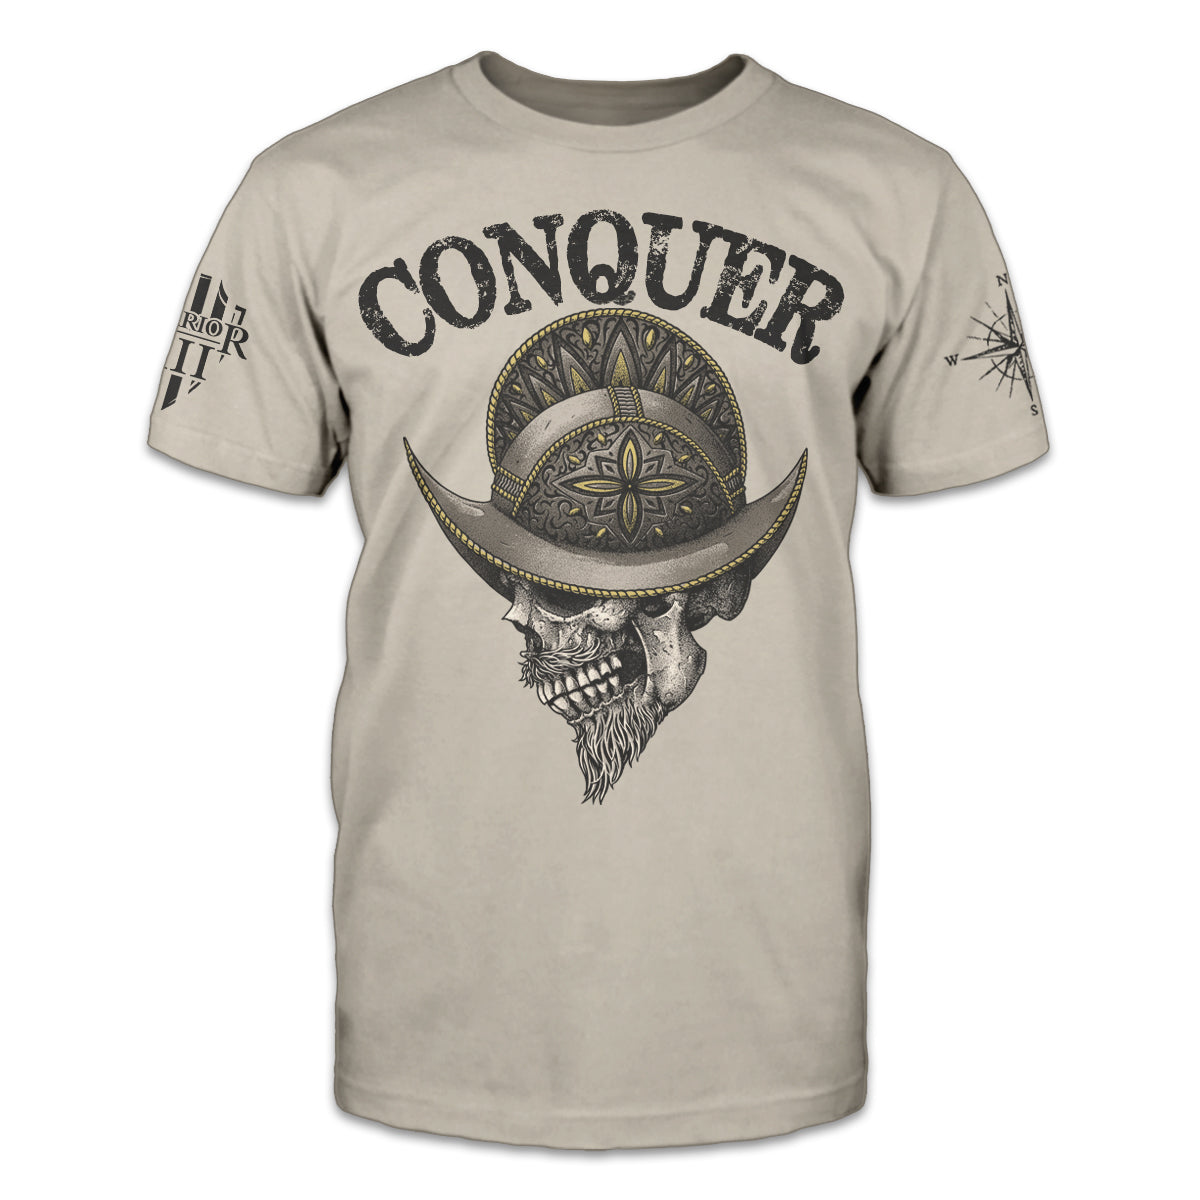 A light tan t-shirt which says "conquer" on the front with an image below of a bearded skull wearing a conquistador helmet.